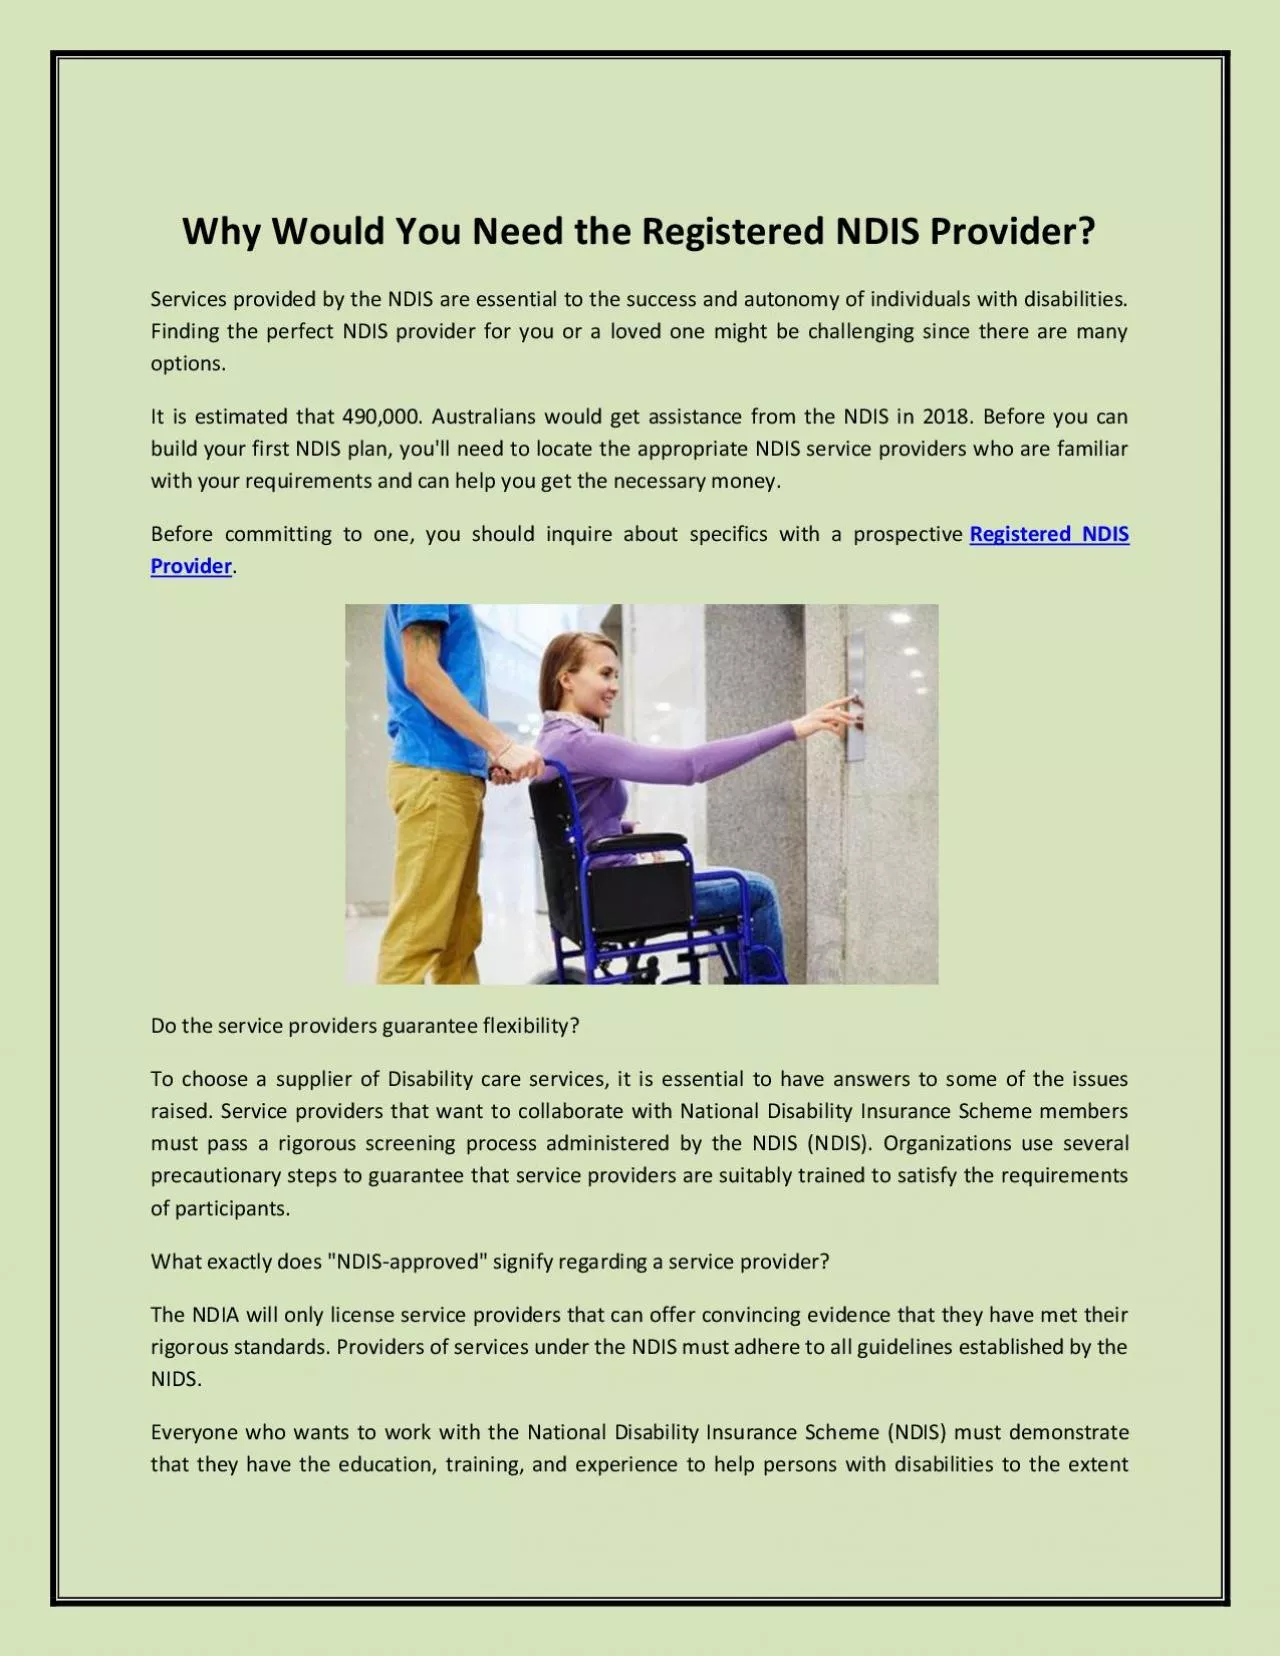 Why Would You Need the Registered NDIS Provider?